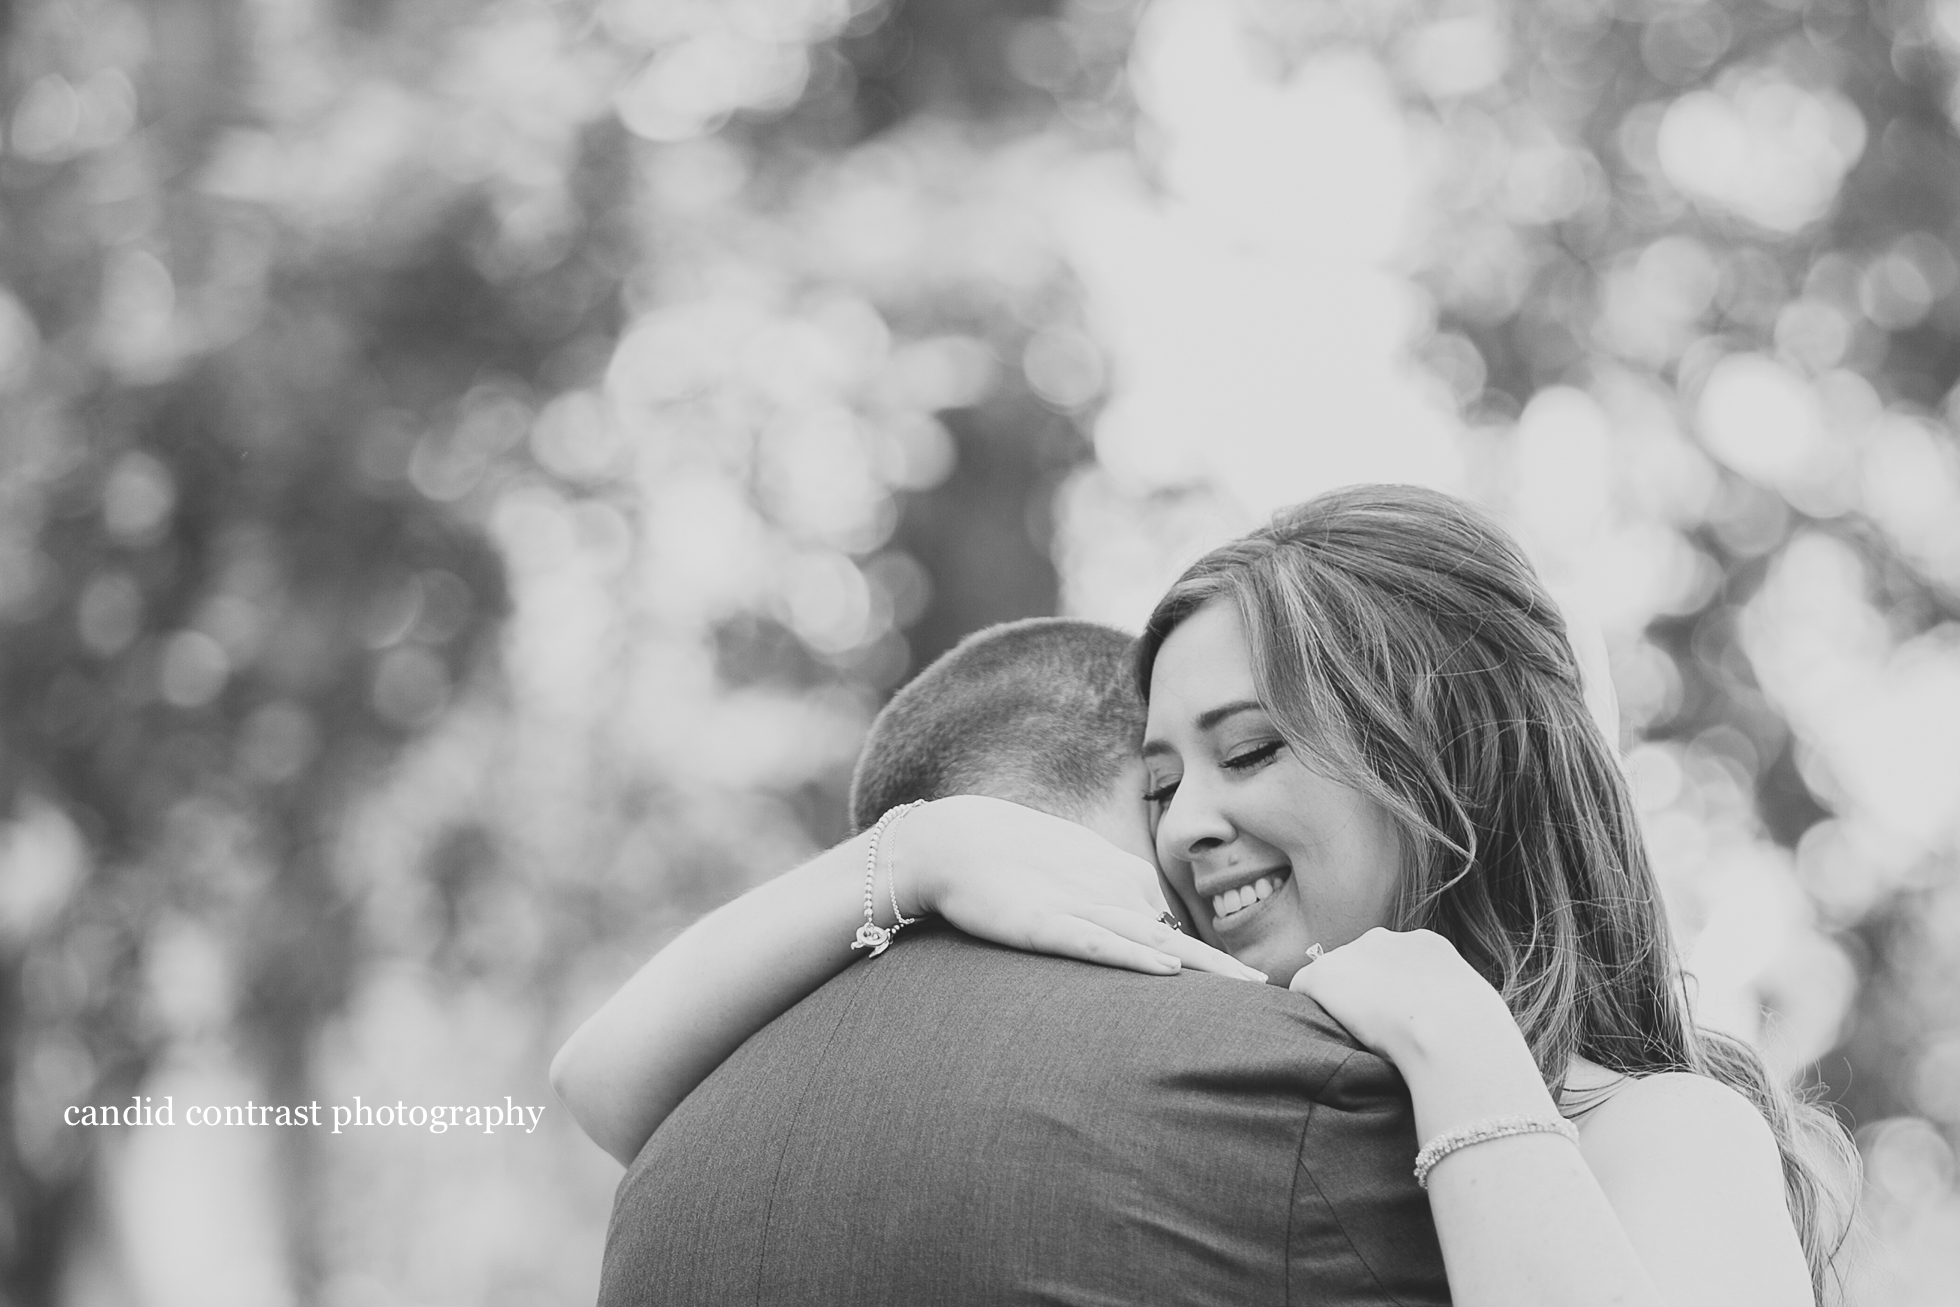 candid contrast photography, bride and groom at dubuque arboretum wedding, dubuque ia